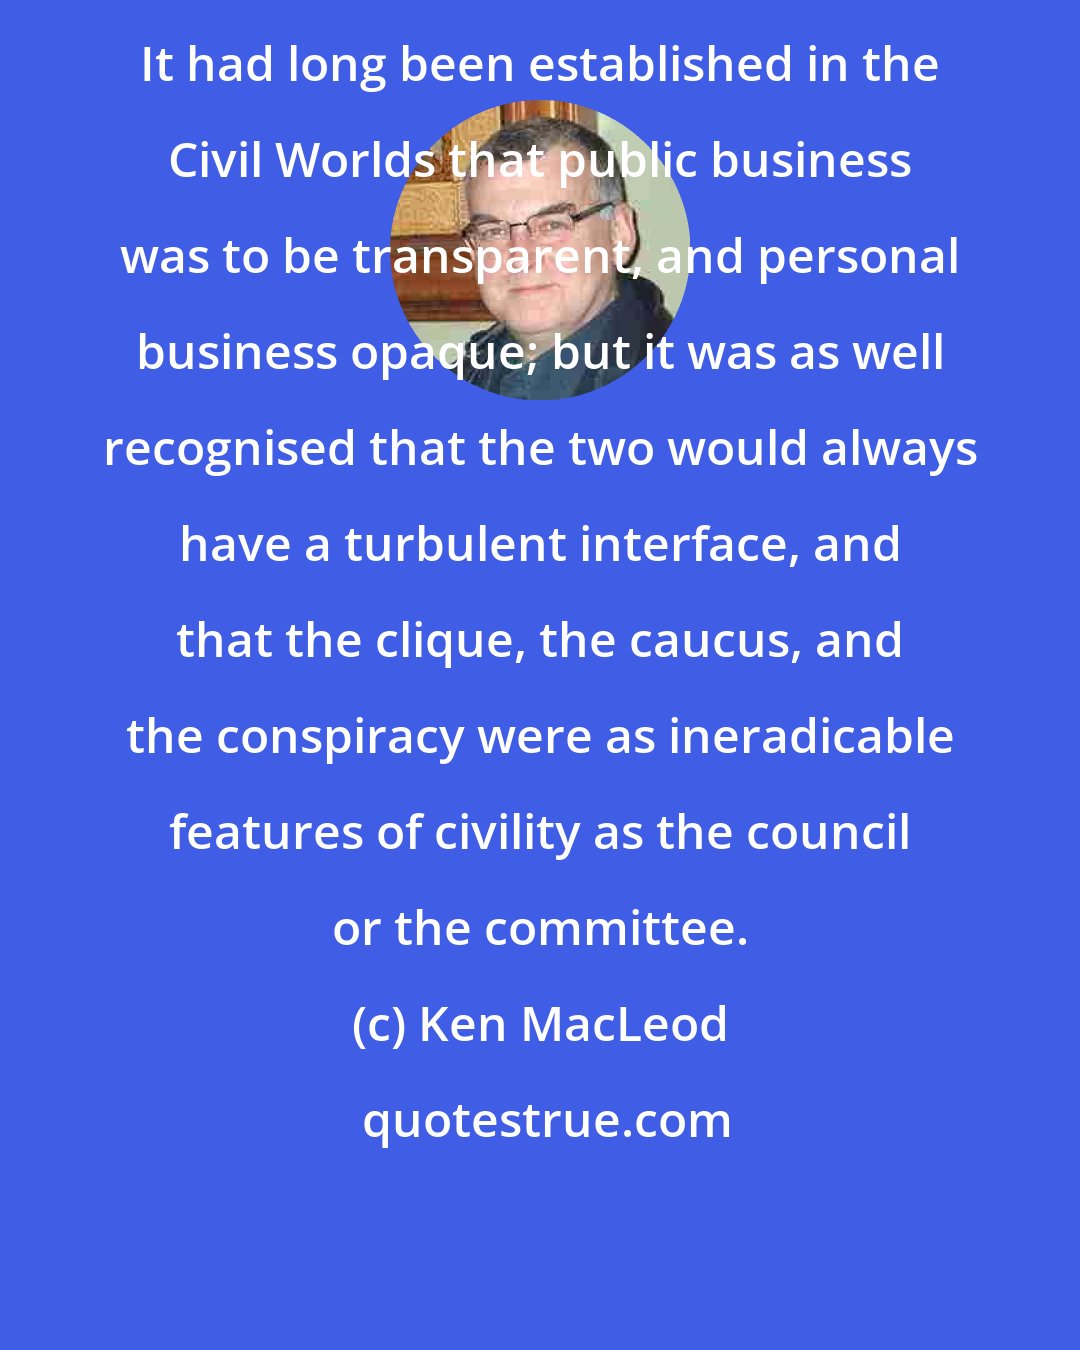 Ken MacLeod: It had long been established in the Civil Worlds that public business was to be transparent, and personal business opaque; but it was as well recognised that the two would always have a turbulent interface, and that the clique, the caucus, and the conspiracy were as ineradicable features of civility as the council or the committee.